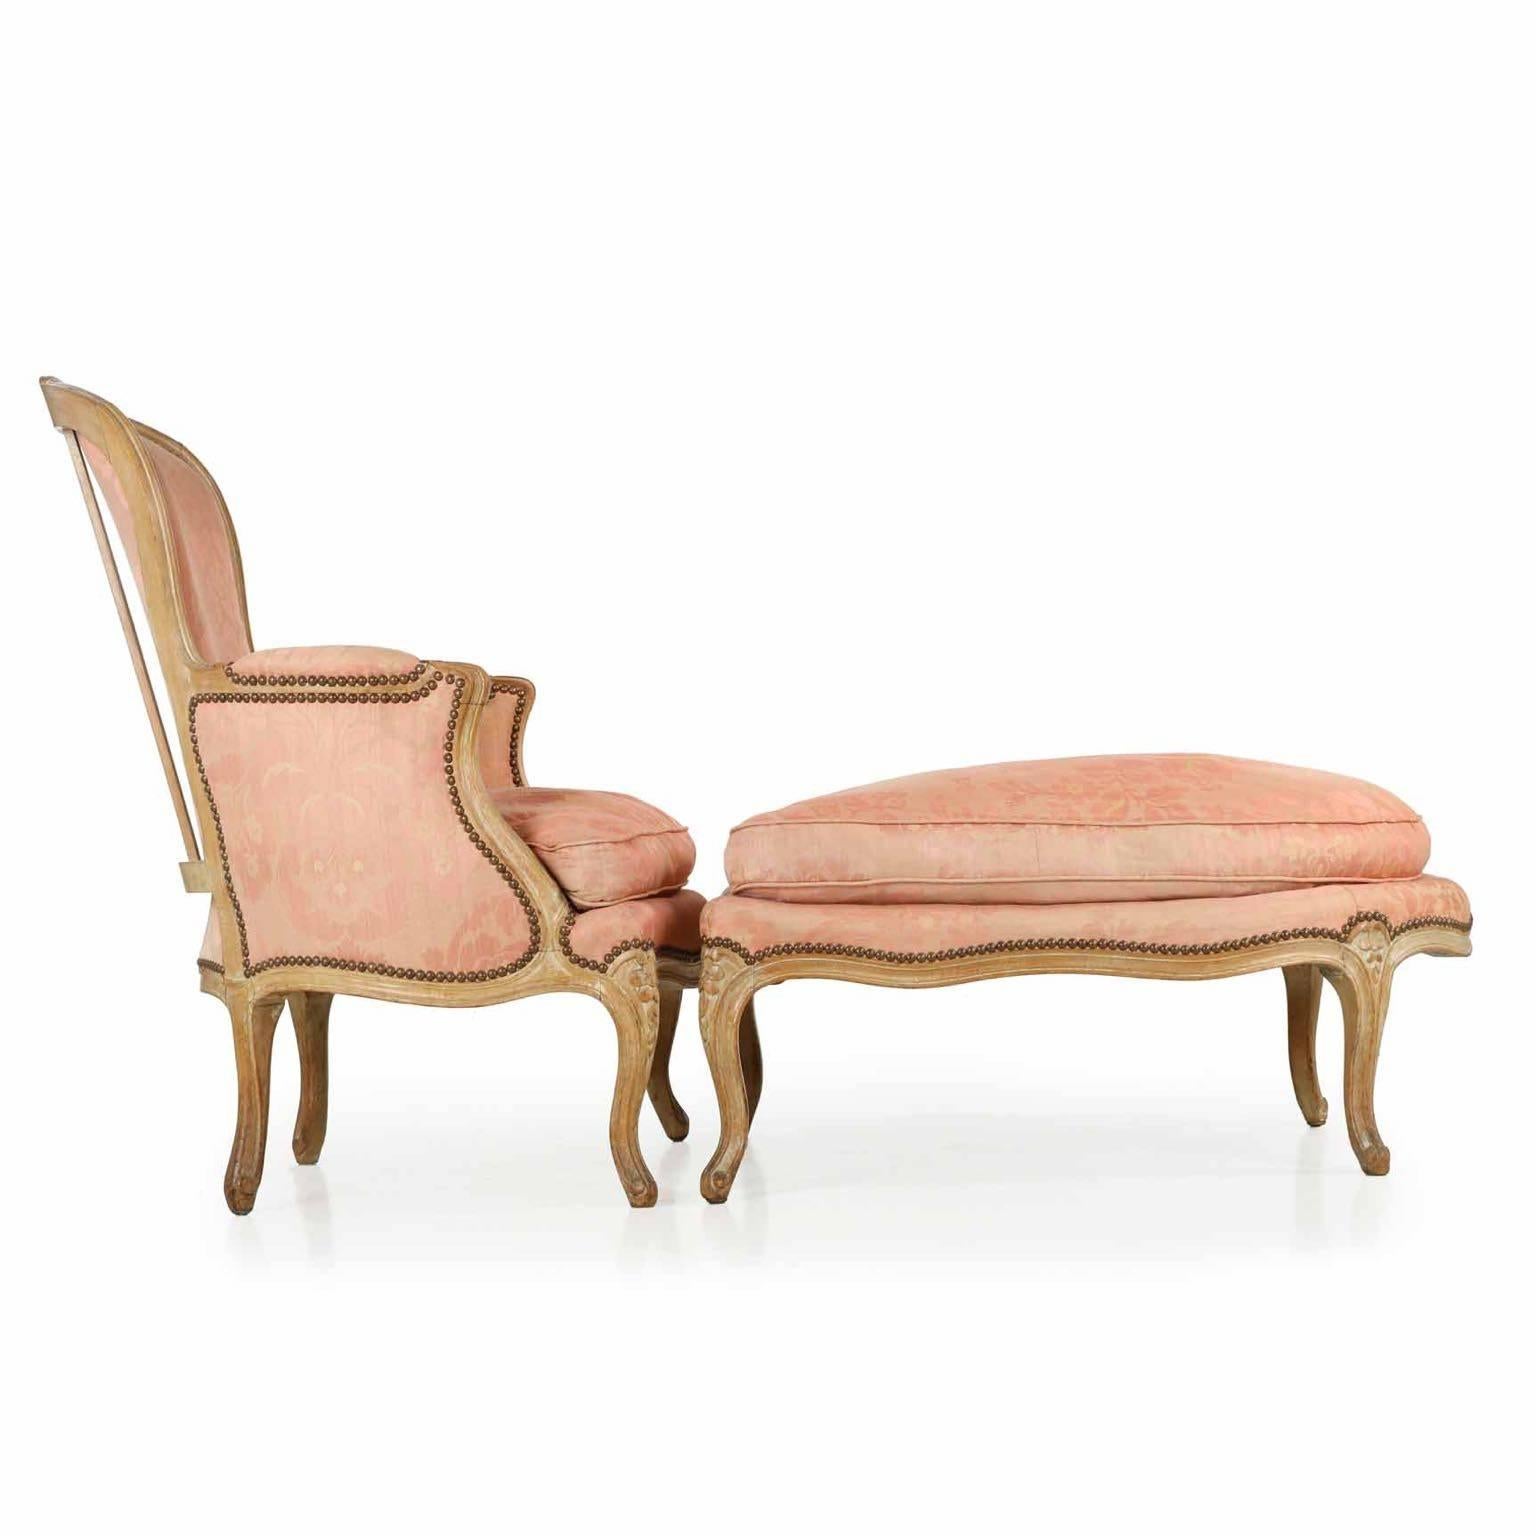 A Classic French two-part chaise longue in the duchesse brisee style, combining a lovely bergere and a long footstool. It is not simply a beautiful piece of craftsmanship to look on or to create aesthetic beauty in a room; the bergere and stool are